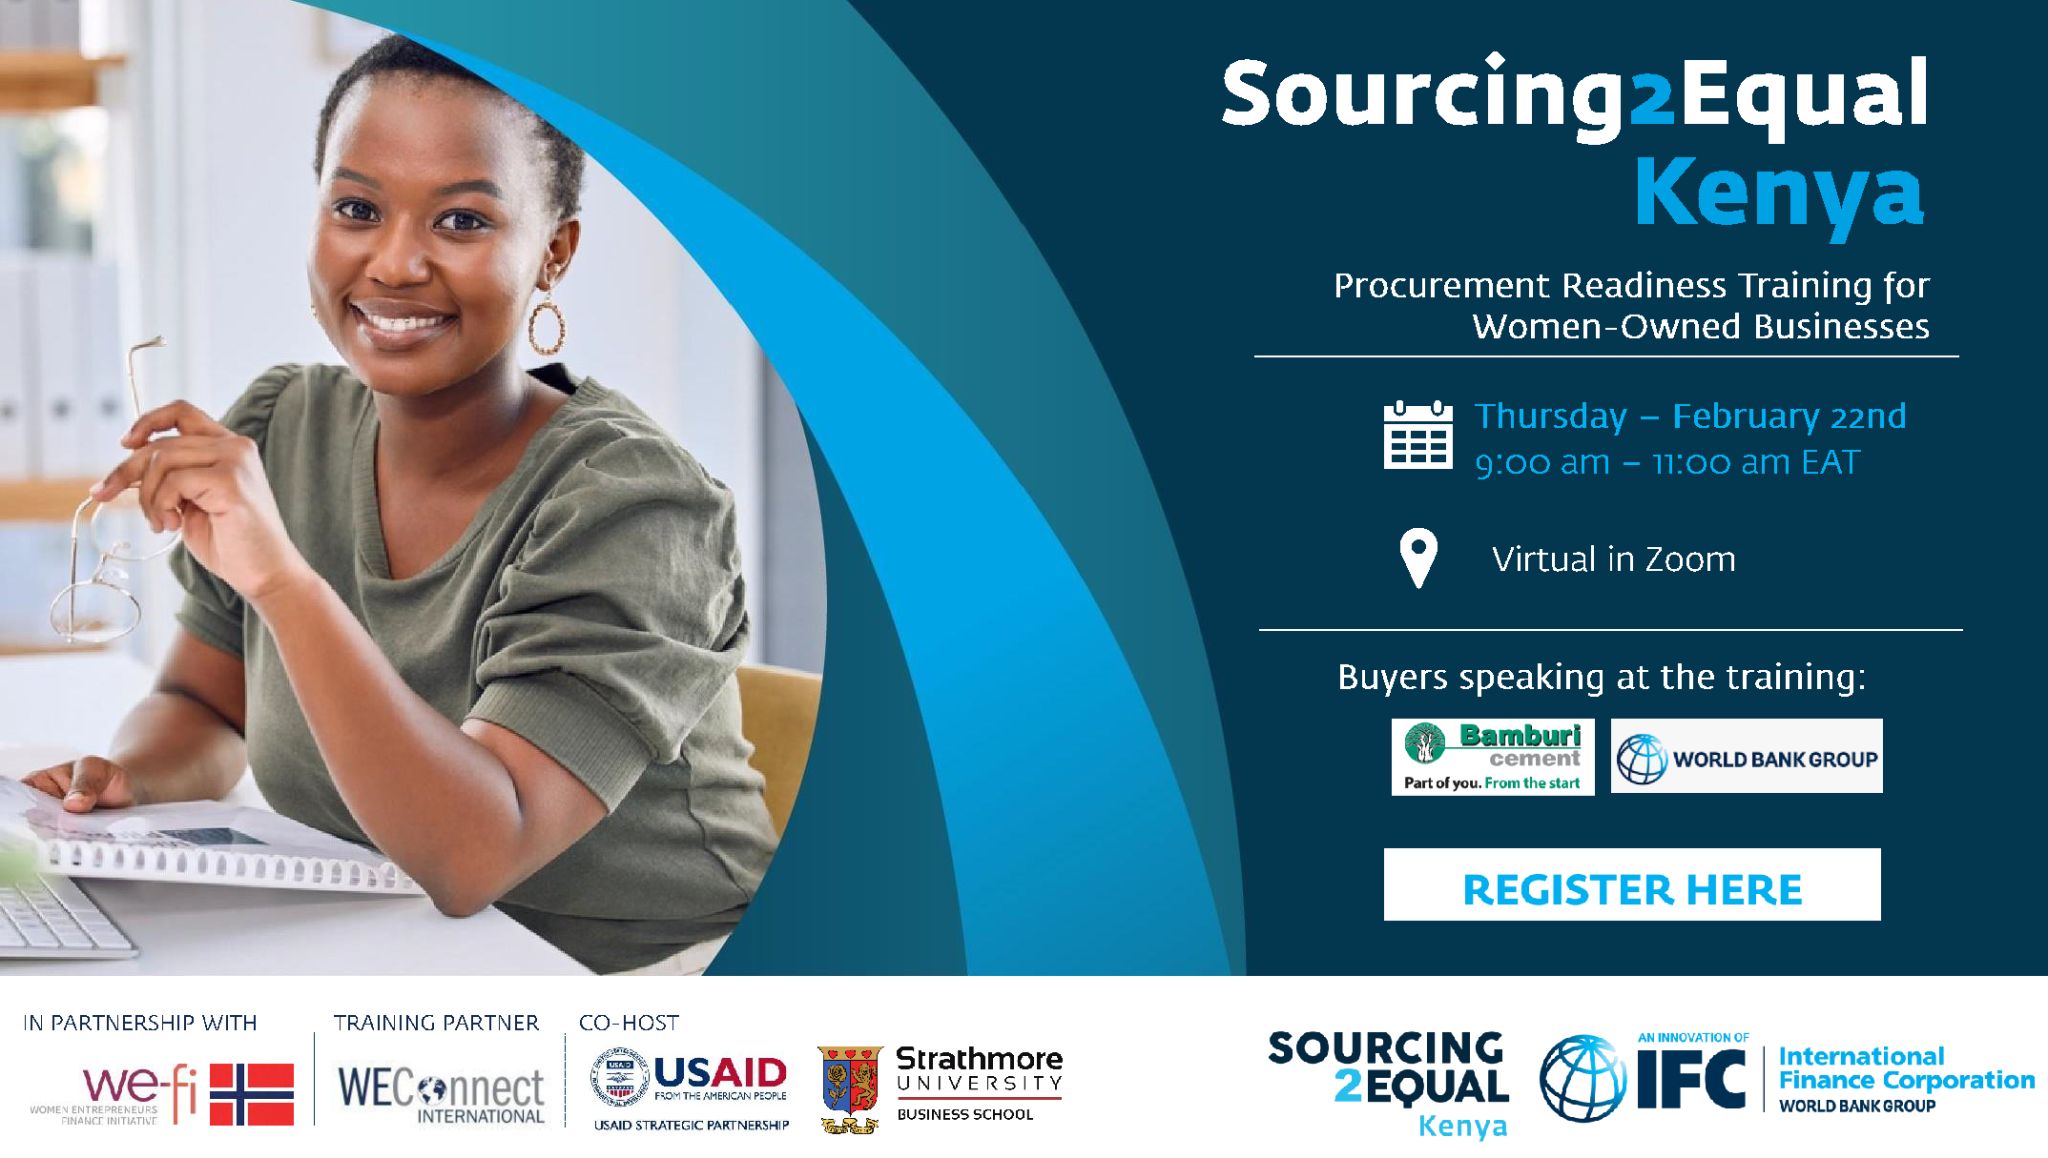 Partner's Opportunity: Procurement Readiness Training for Women-Owned Businesses